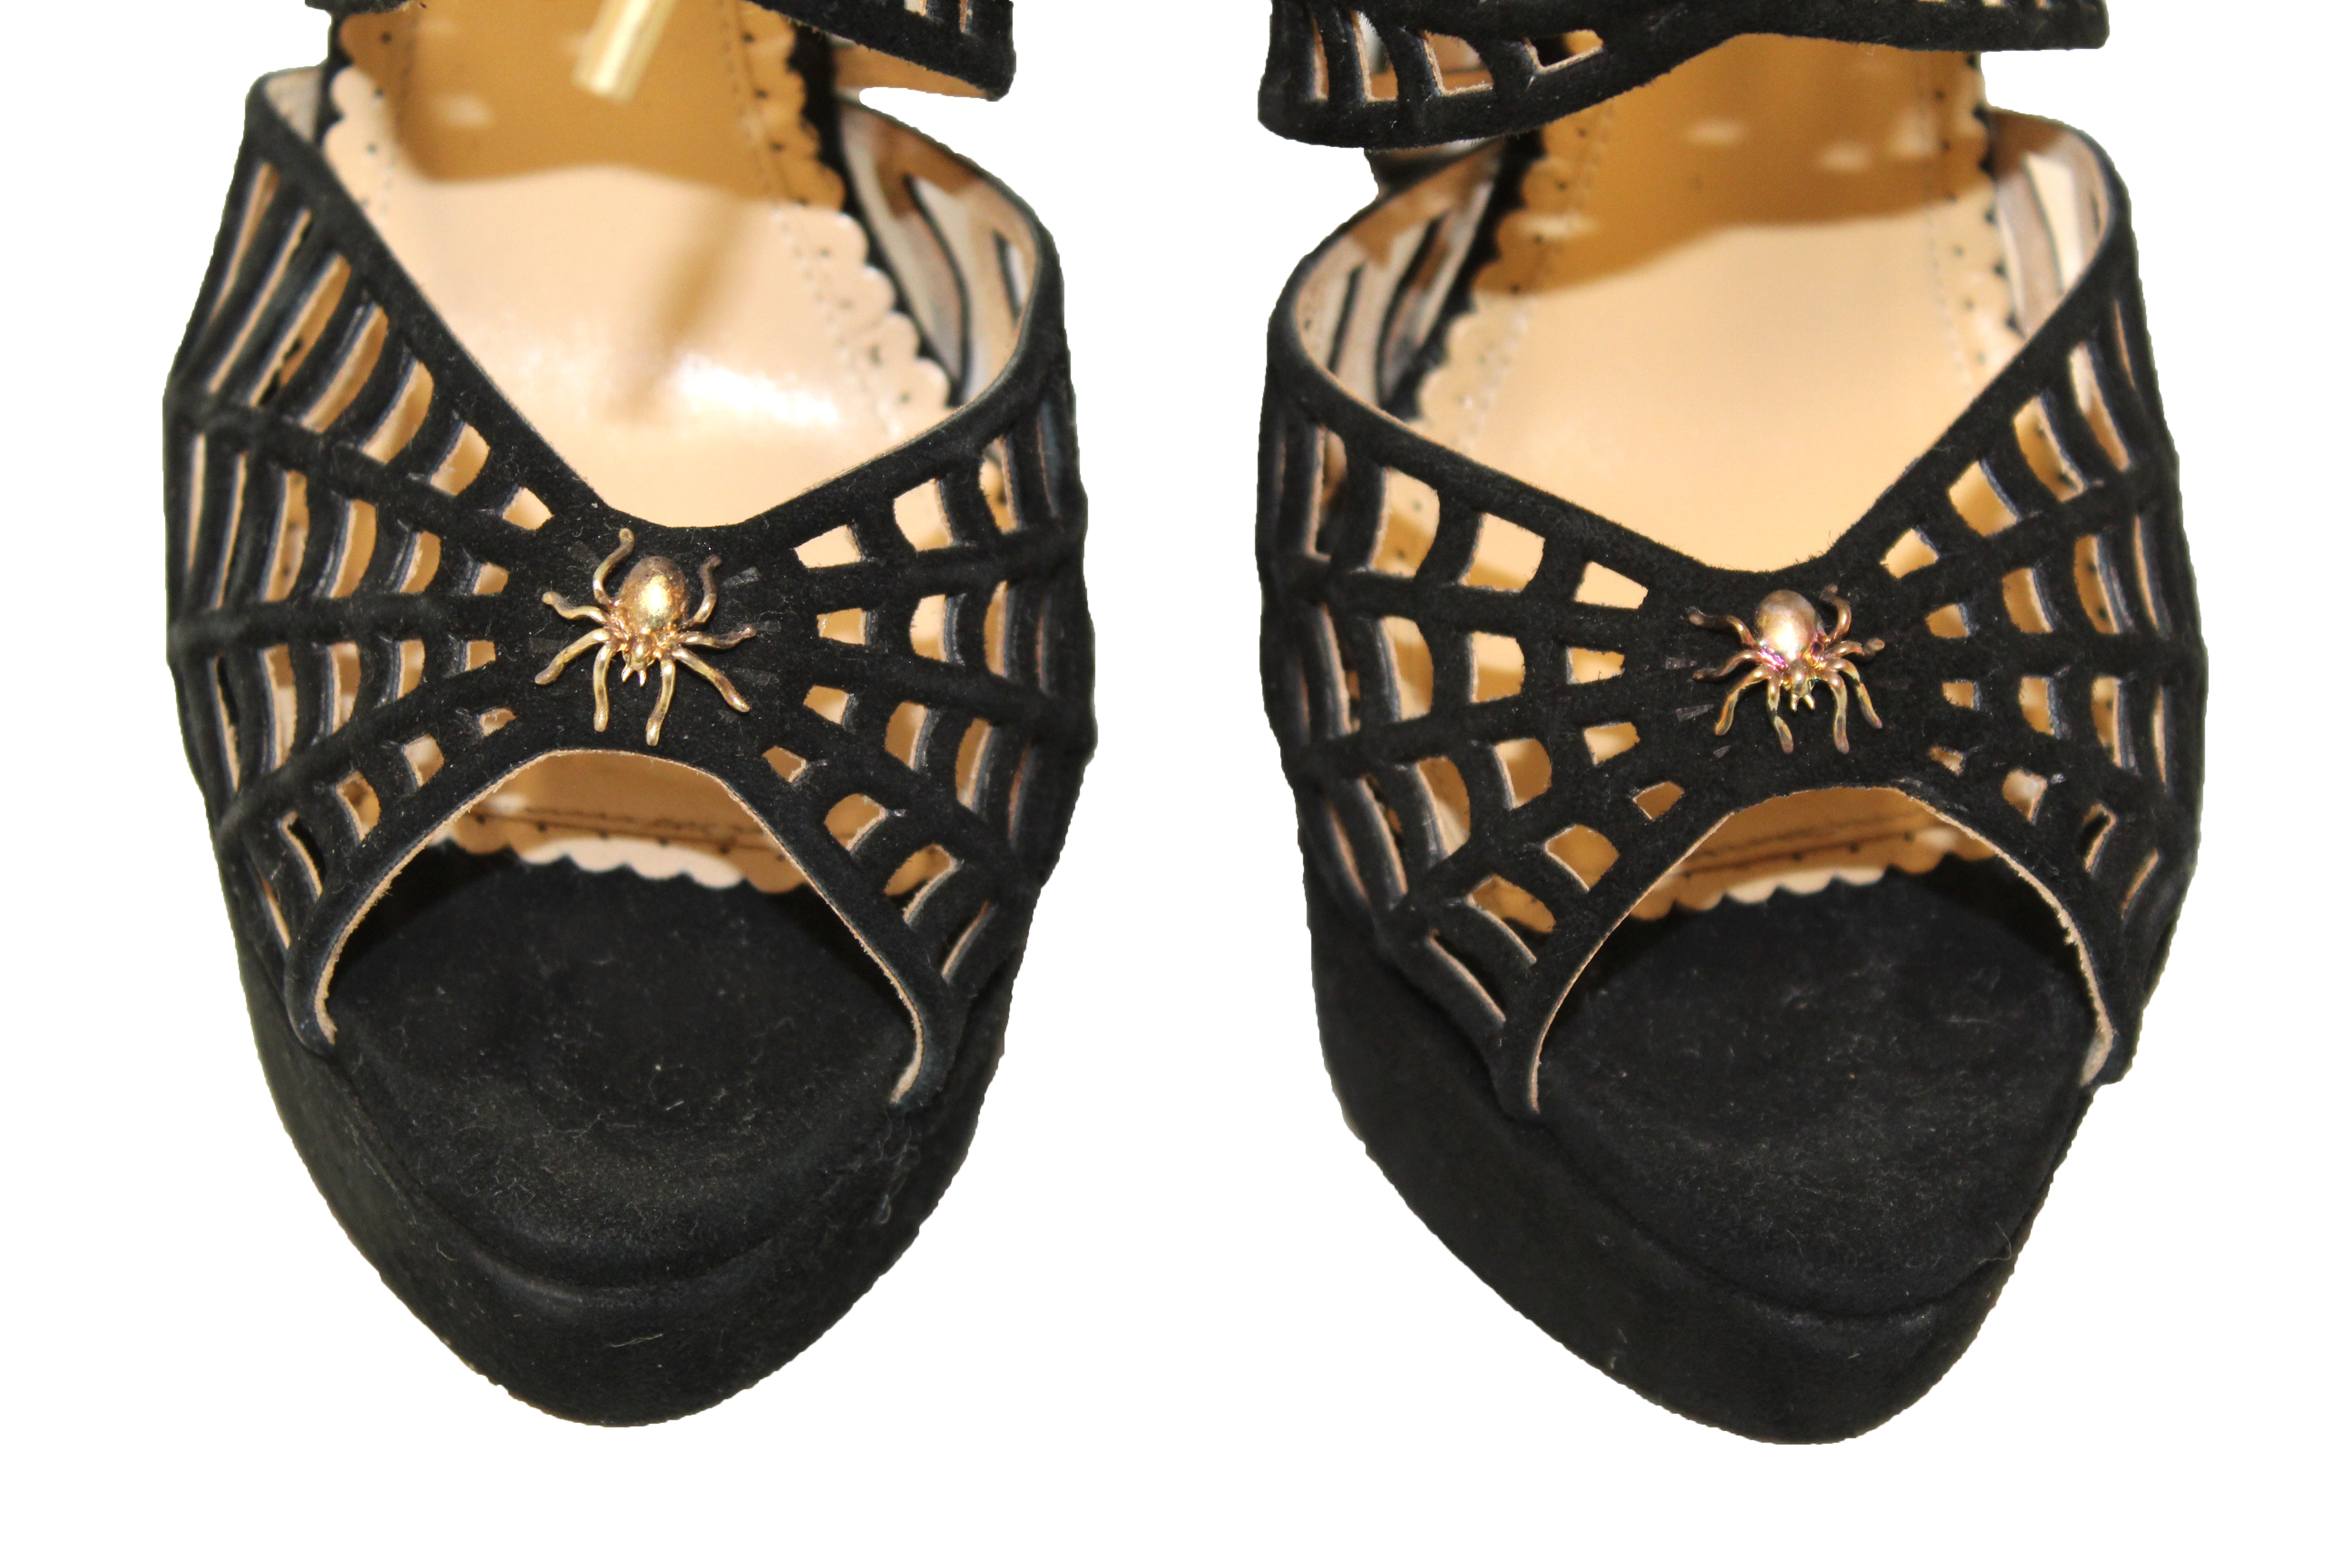 Authentic Charlotte Olympia Black Suede Spiderweb Stiletto Heels Shoes Size 36.5